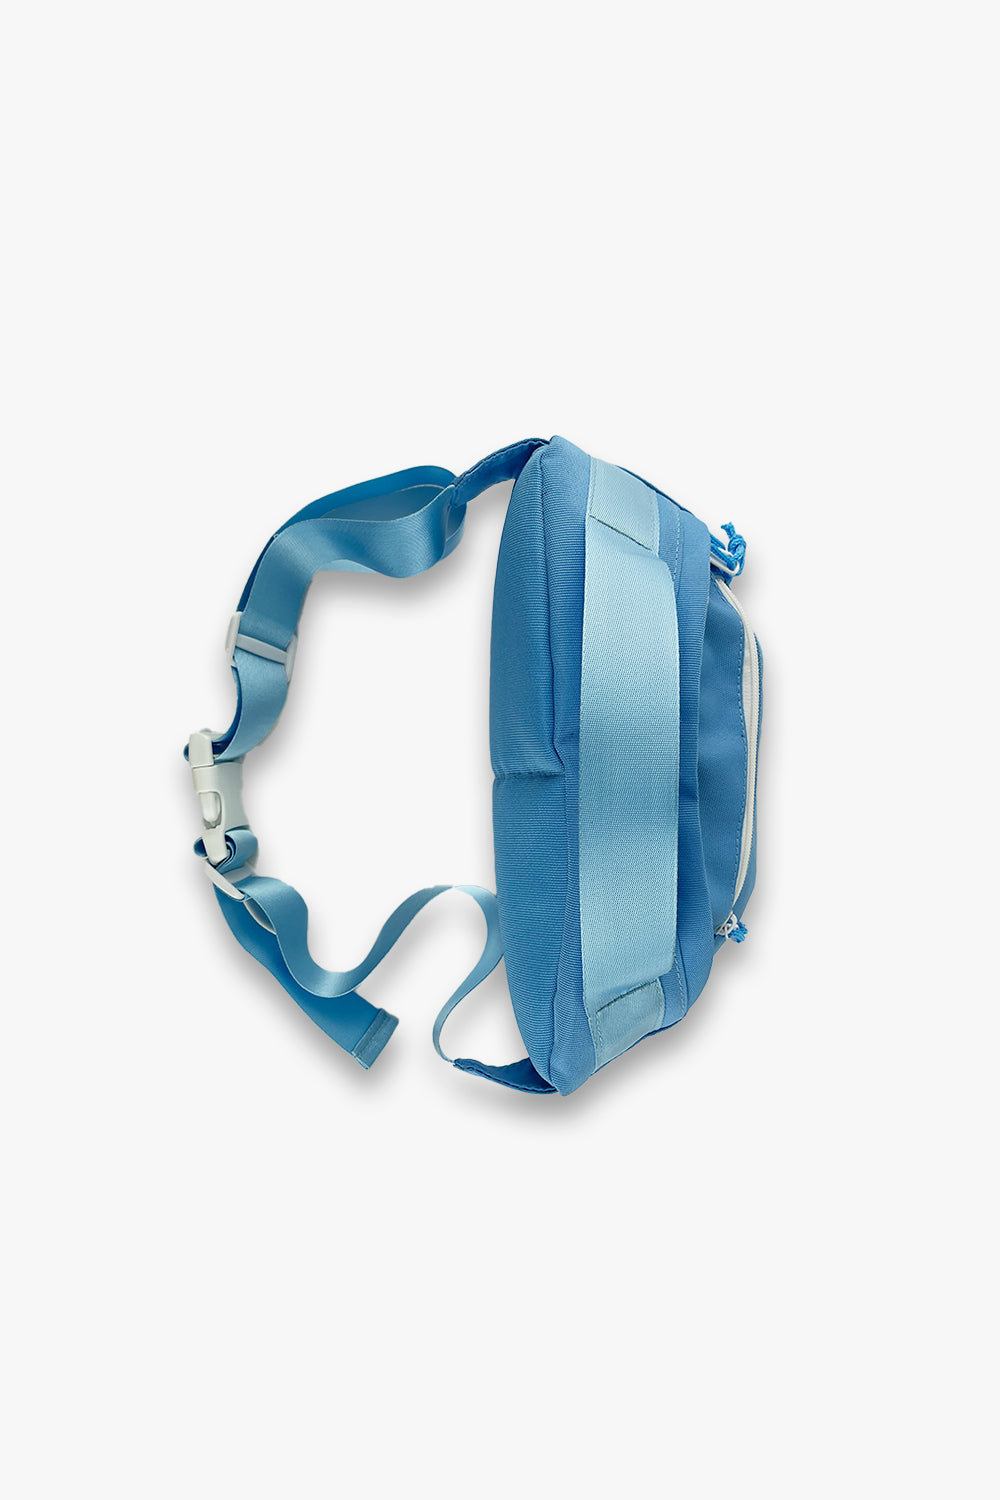 blue fanny pack top view